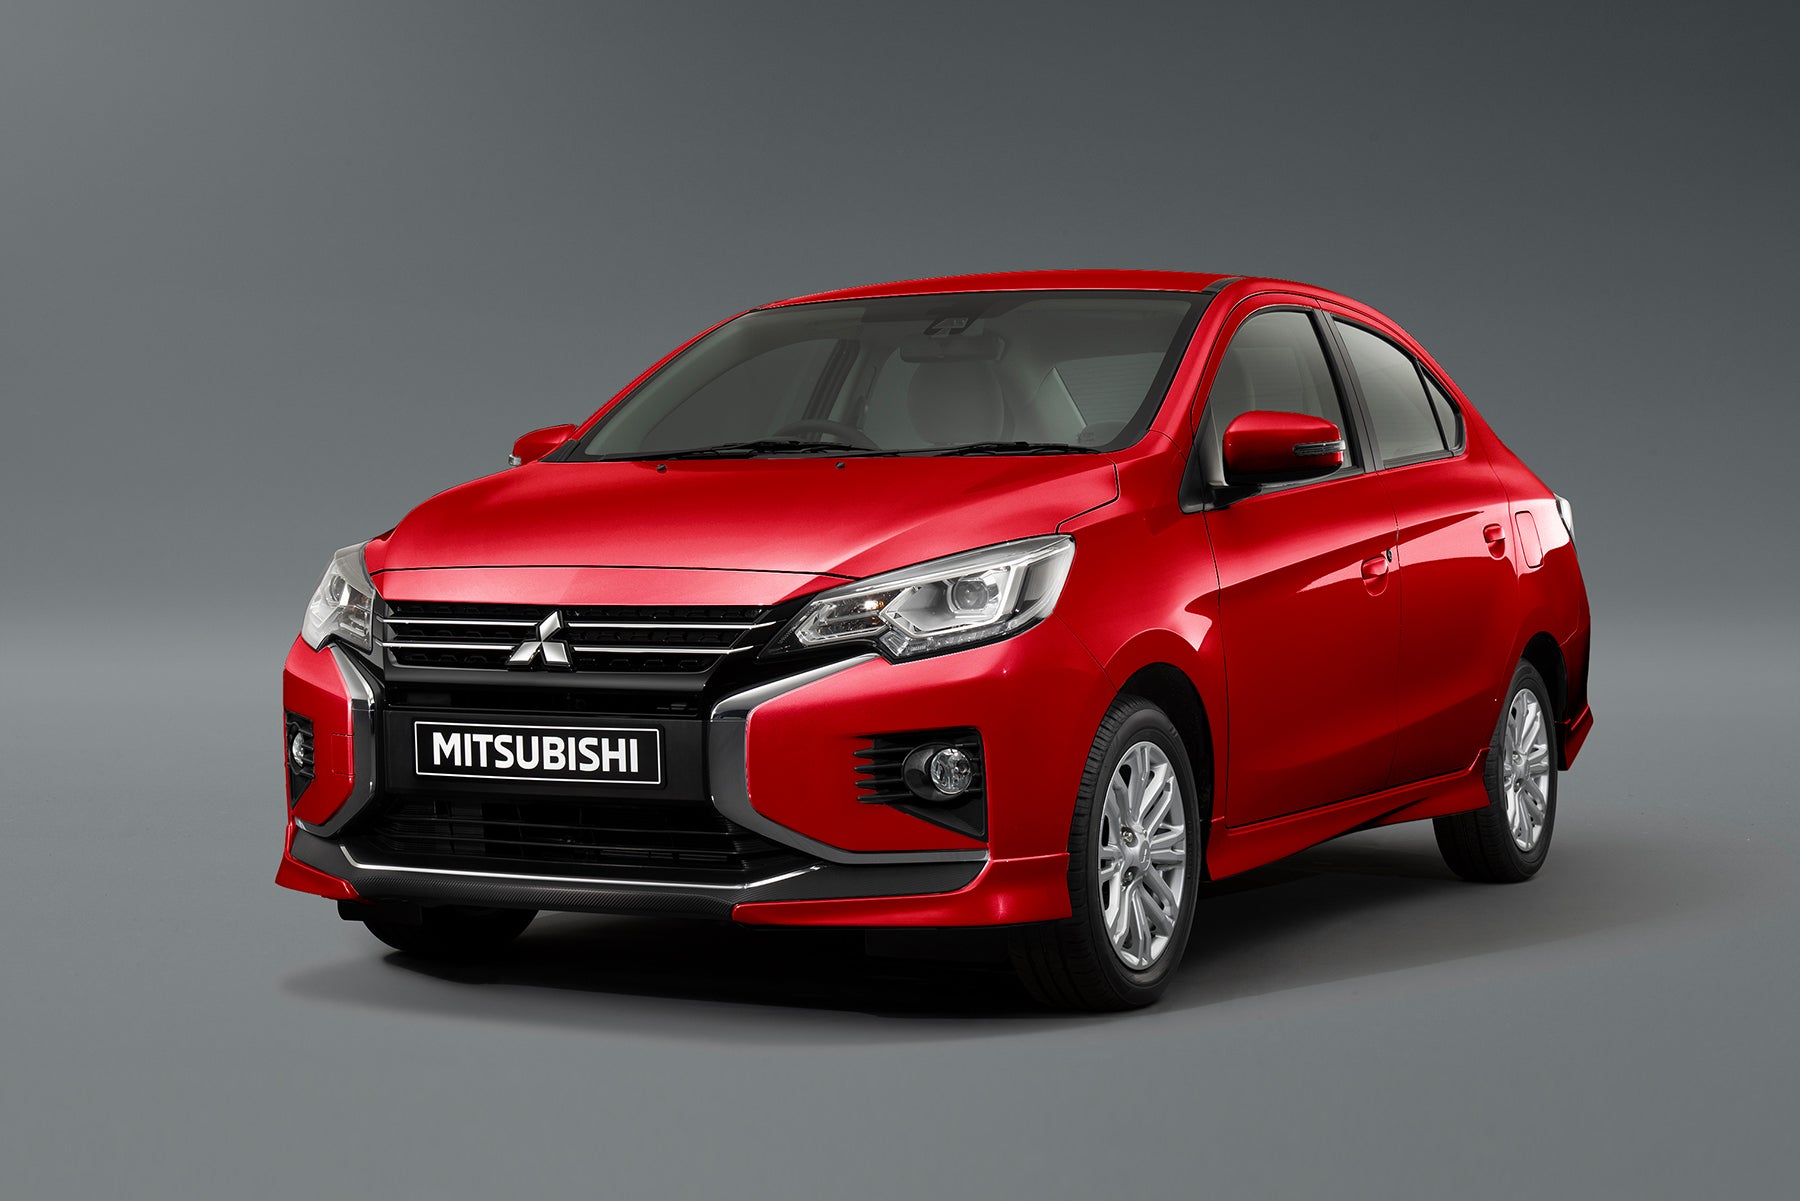 The Mitsubishi Mirage G4 Comes With Free Insurance, Chattel Mortgage This  January